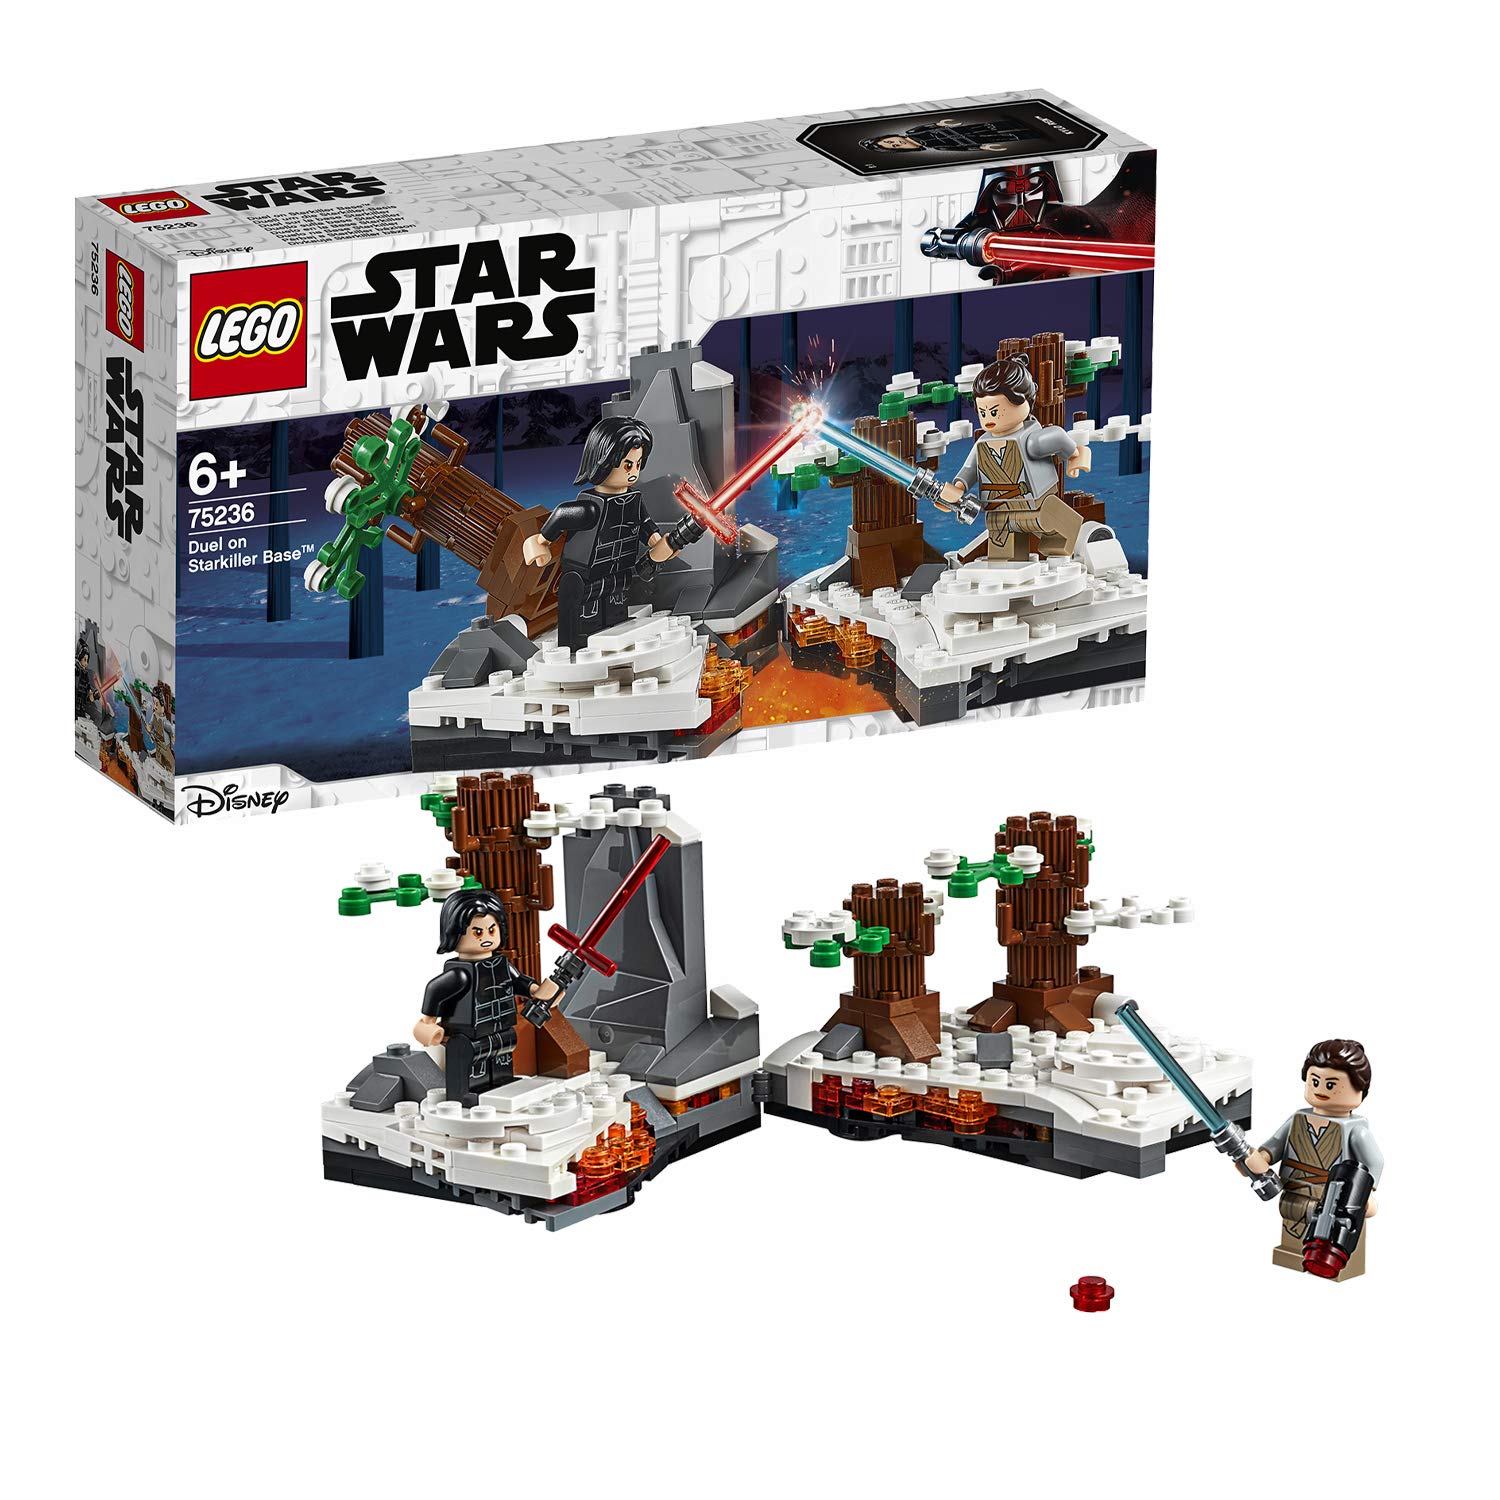 Lego Star Wars 75236 – The Force Awakens Duel For The Starkiller Base, Cons